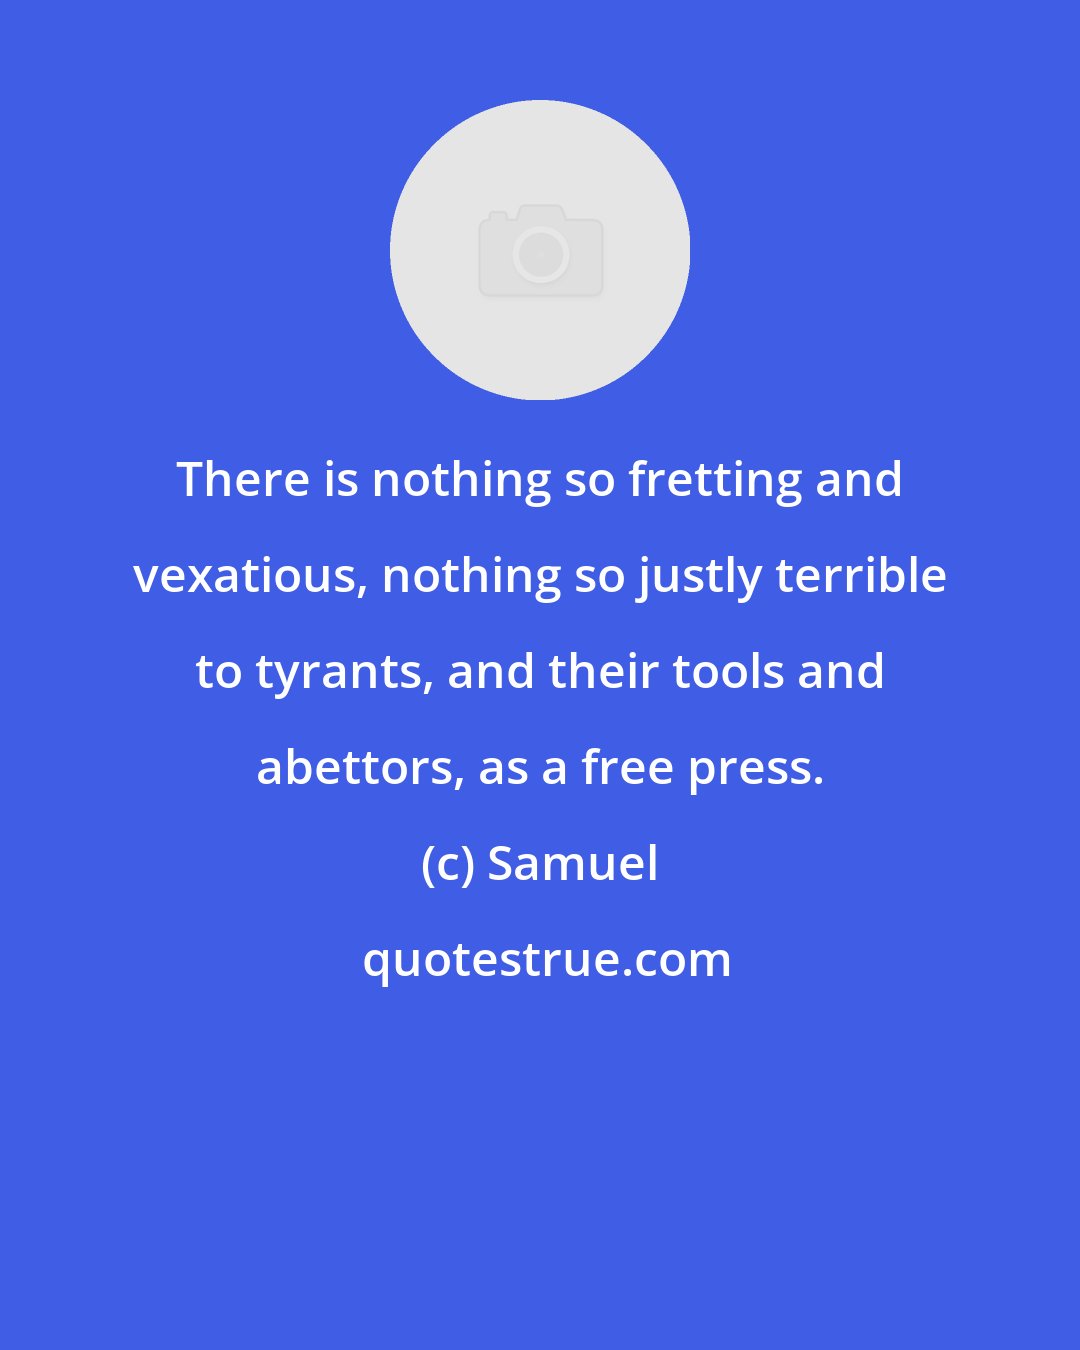 Samuel: There is nothing so fretting and vexatious, nothing so justly terrible to tyrants, and their tools and abettors, as a free press.